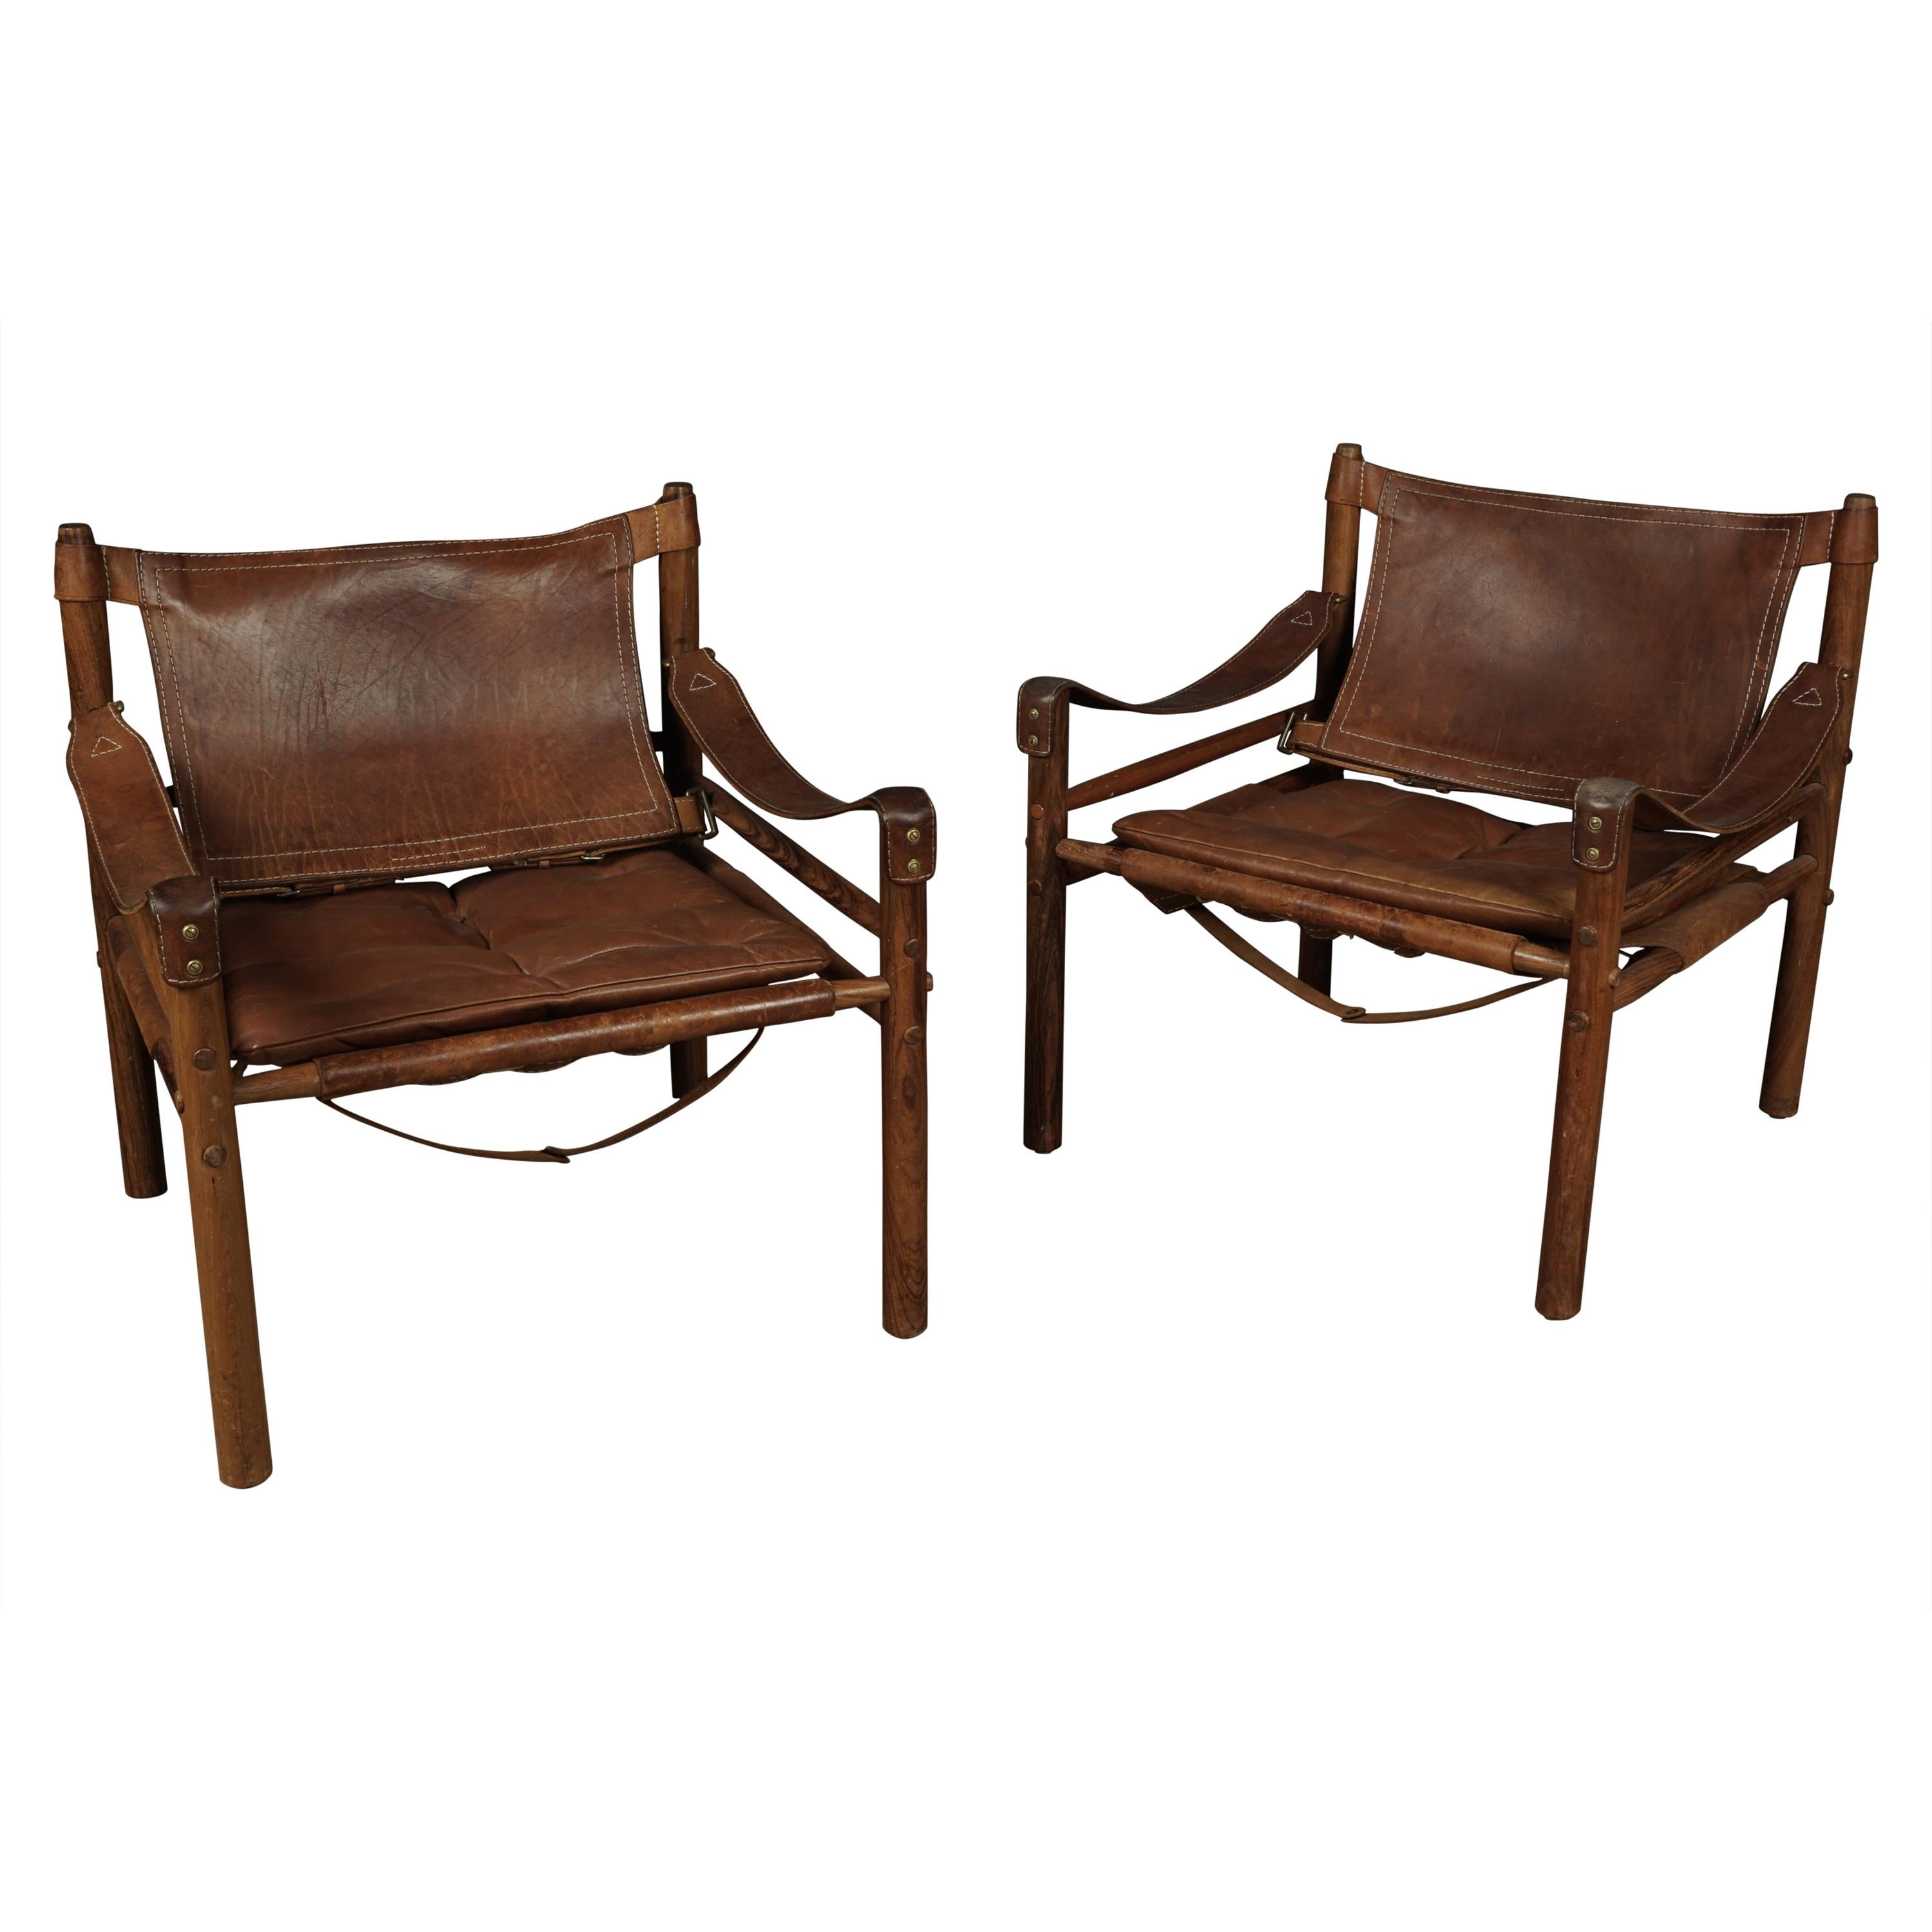 Pair of Arne Norell Safari Lounge Chairs, Model Sirocco, Sweden, 1970s